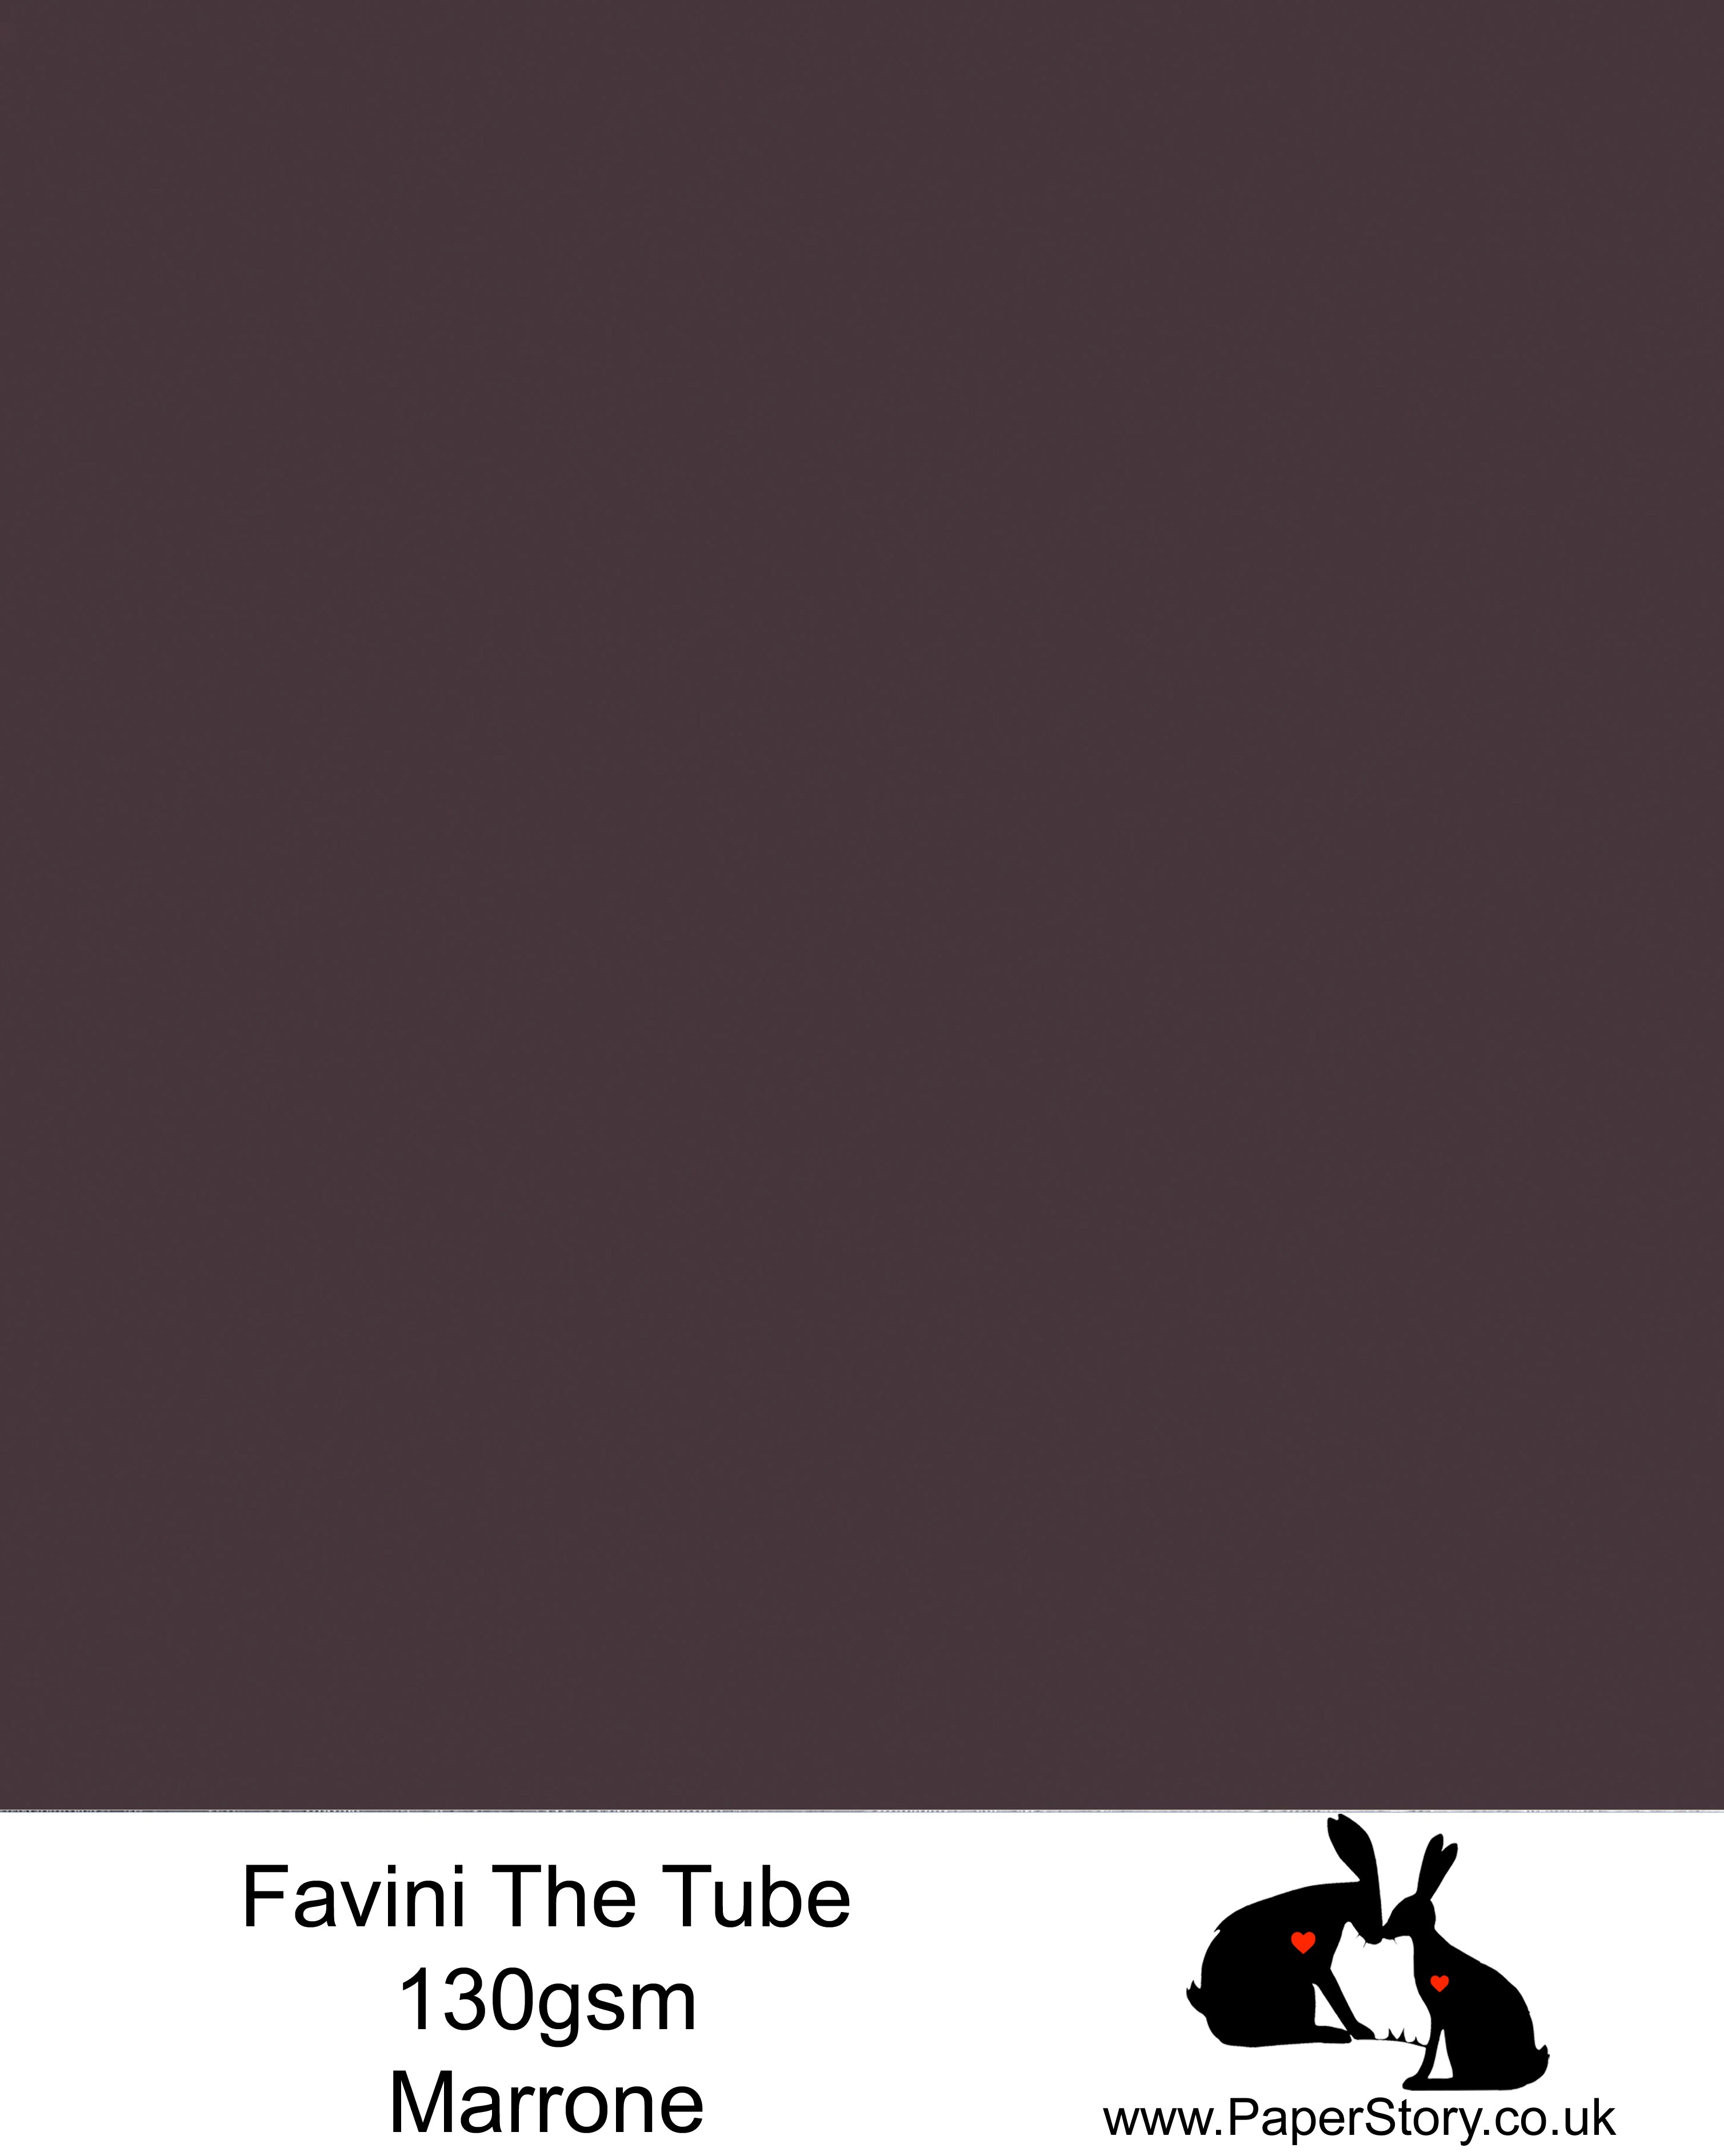 The Tube Favini Marrone Deep Brown with a stunning warm undertone. This is an innovative matte paper and our favourite PaperCutting paper, also be use for foil and screen blocking. The subtle soft touch of this paper provides an elegance unsurpassed by any other paper.